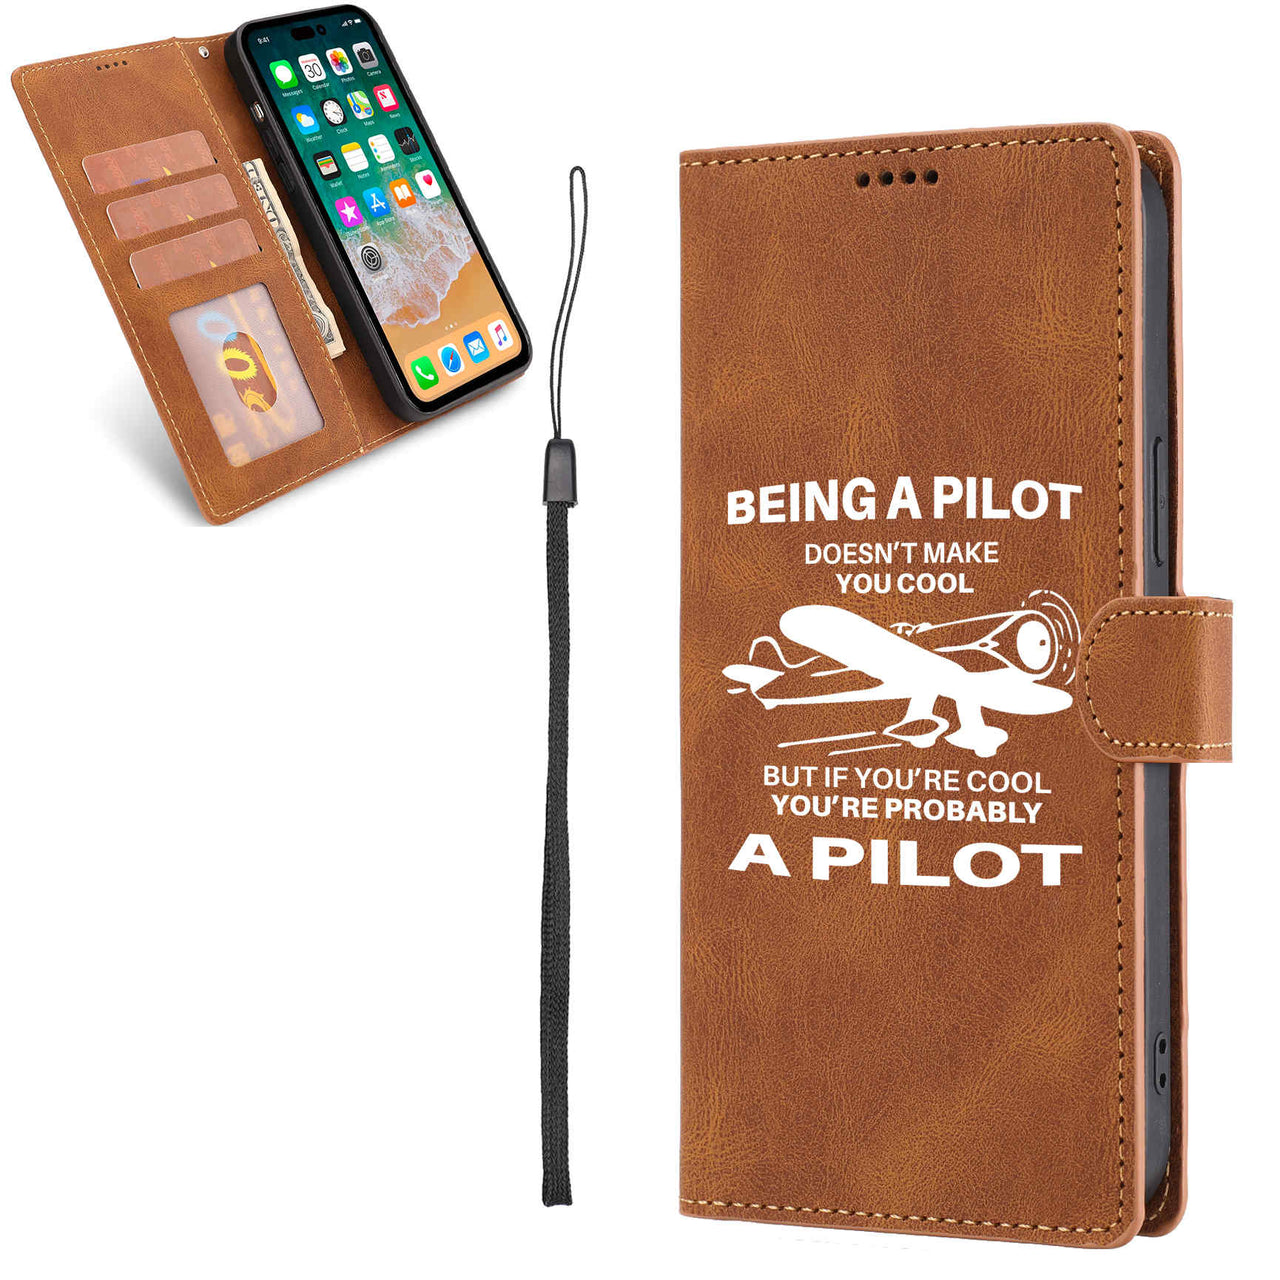 If You're Cool You're Probably a Pilot Designed Leather Samsung S & Note Cases